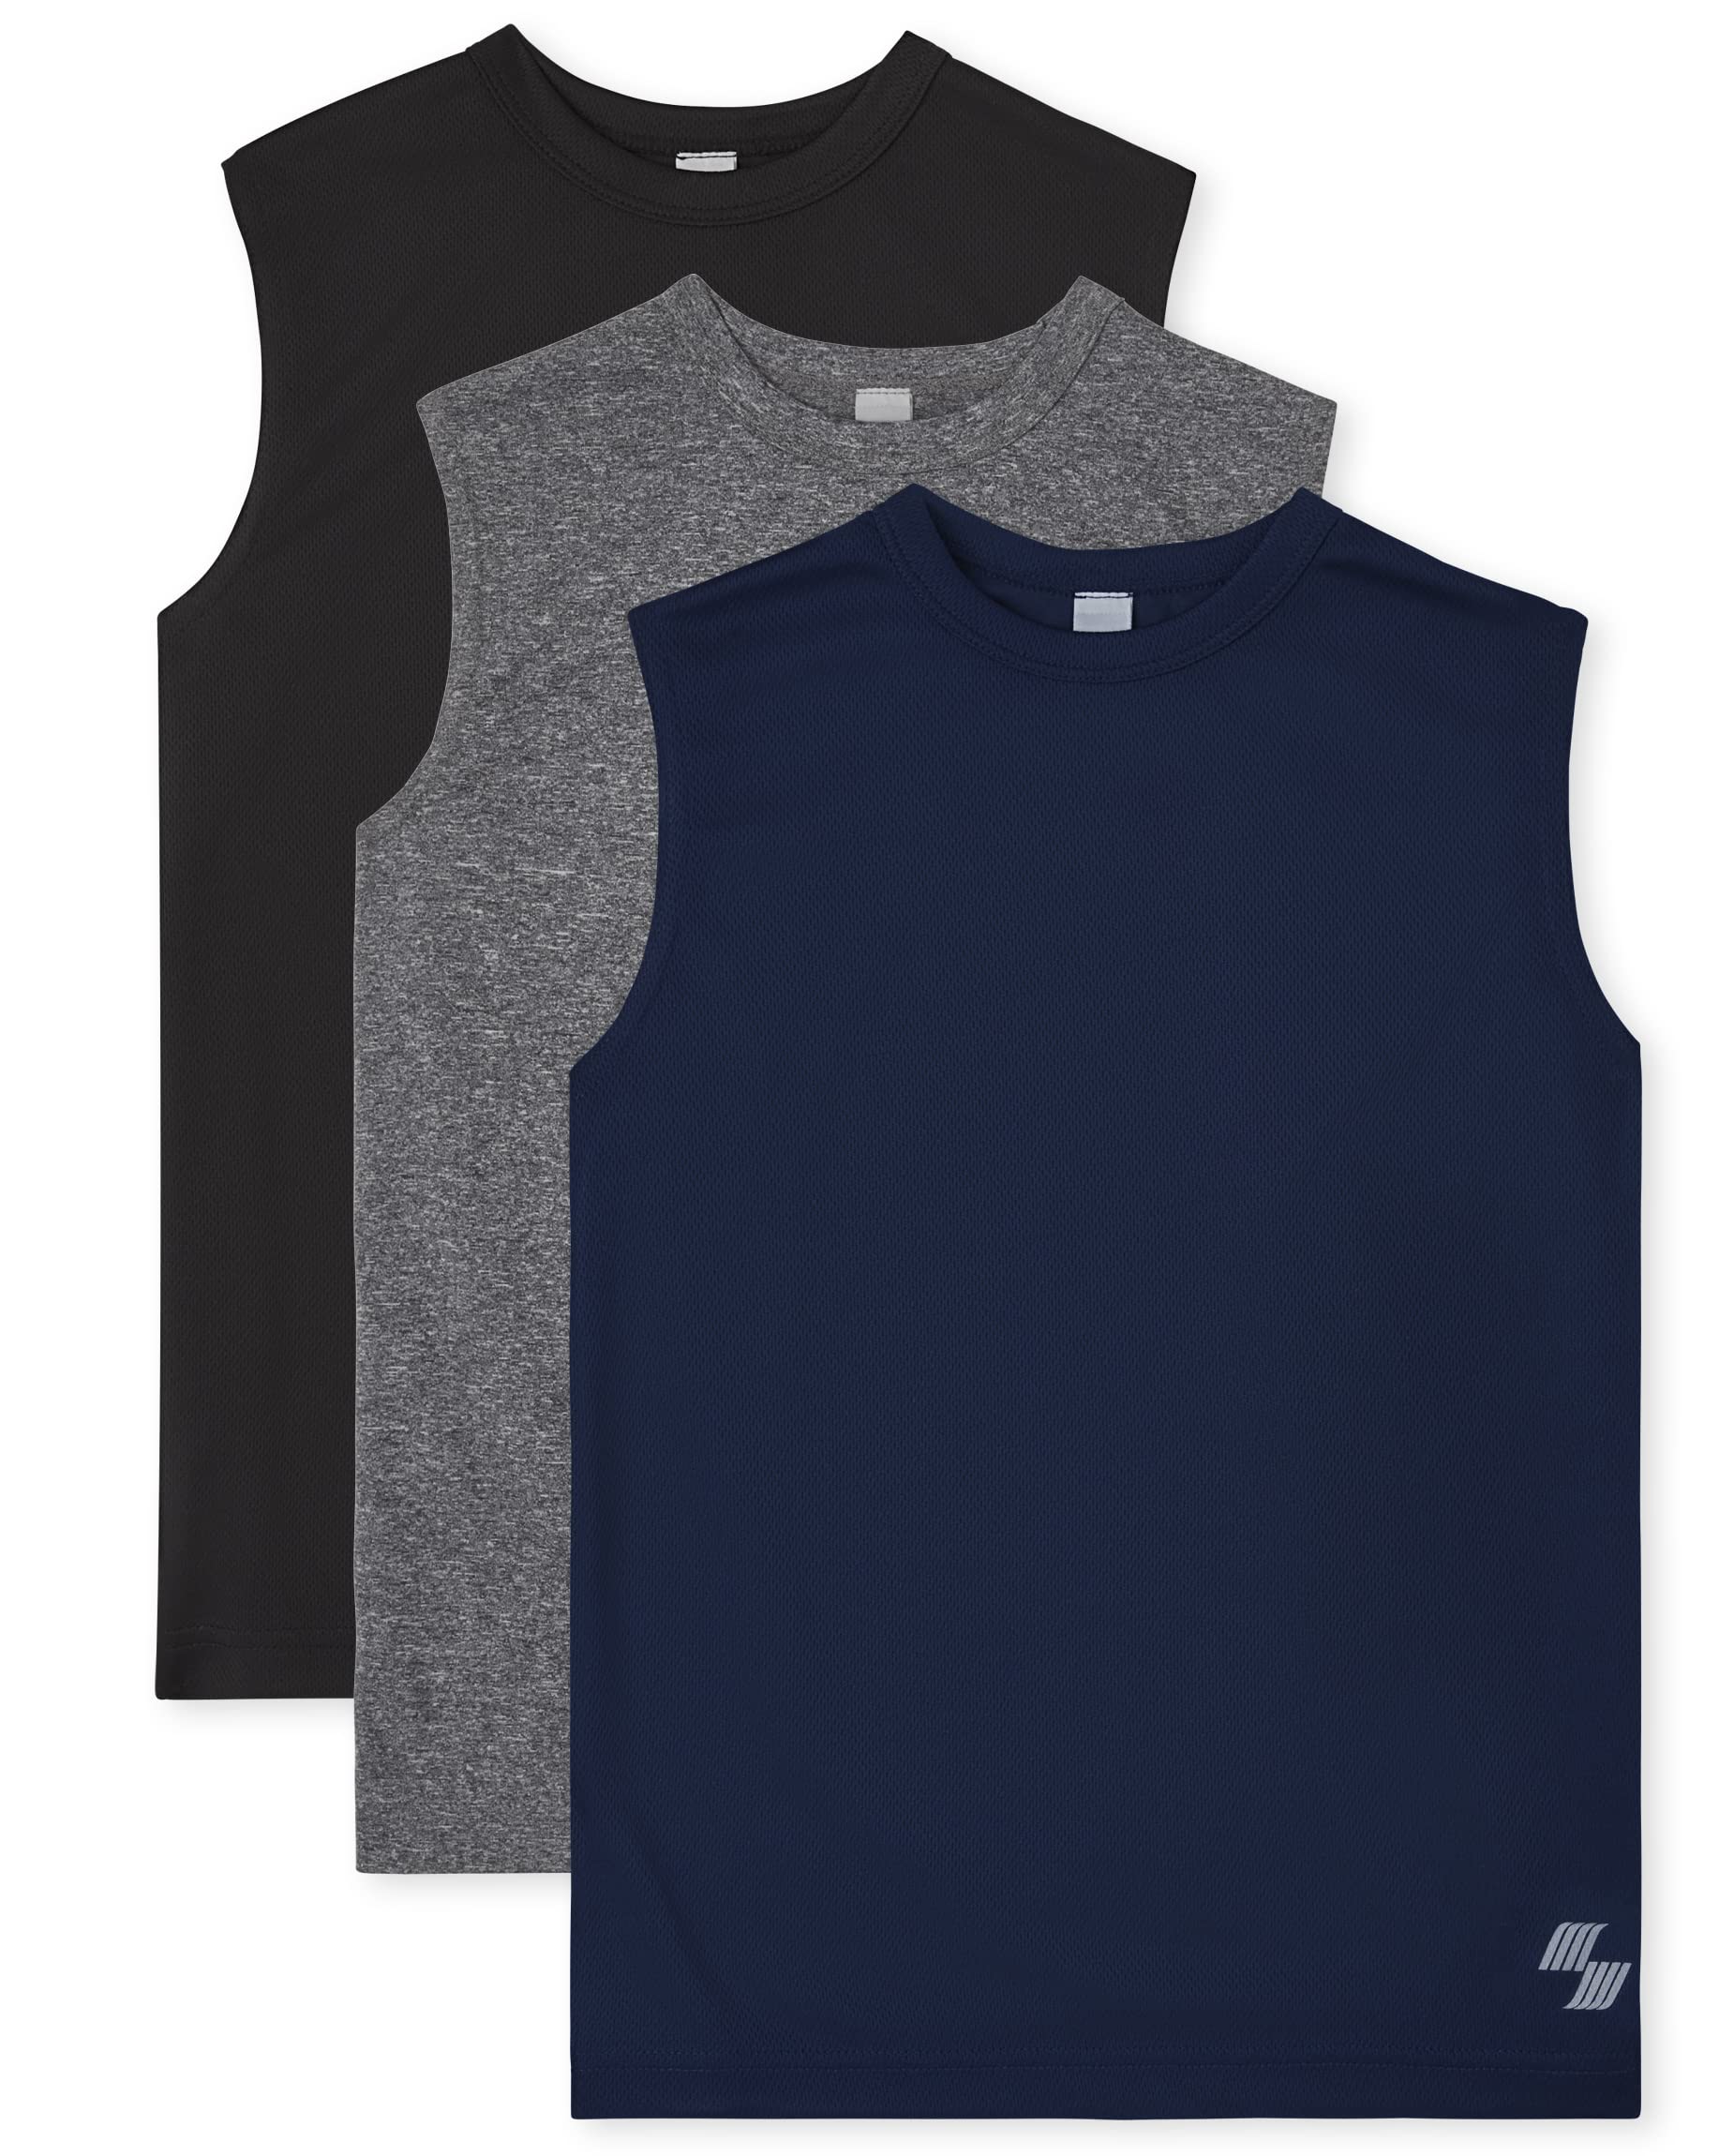 The Children's Place Boys Performance Muscle Tank Top 3-Pack